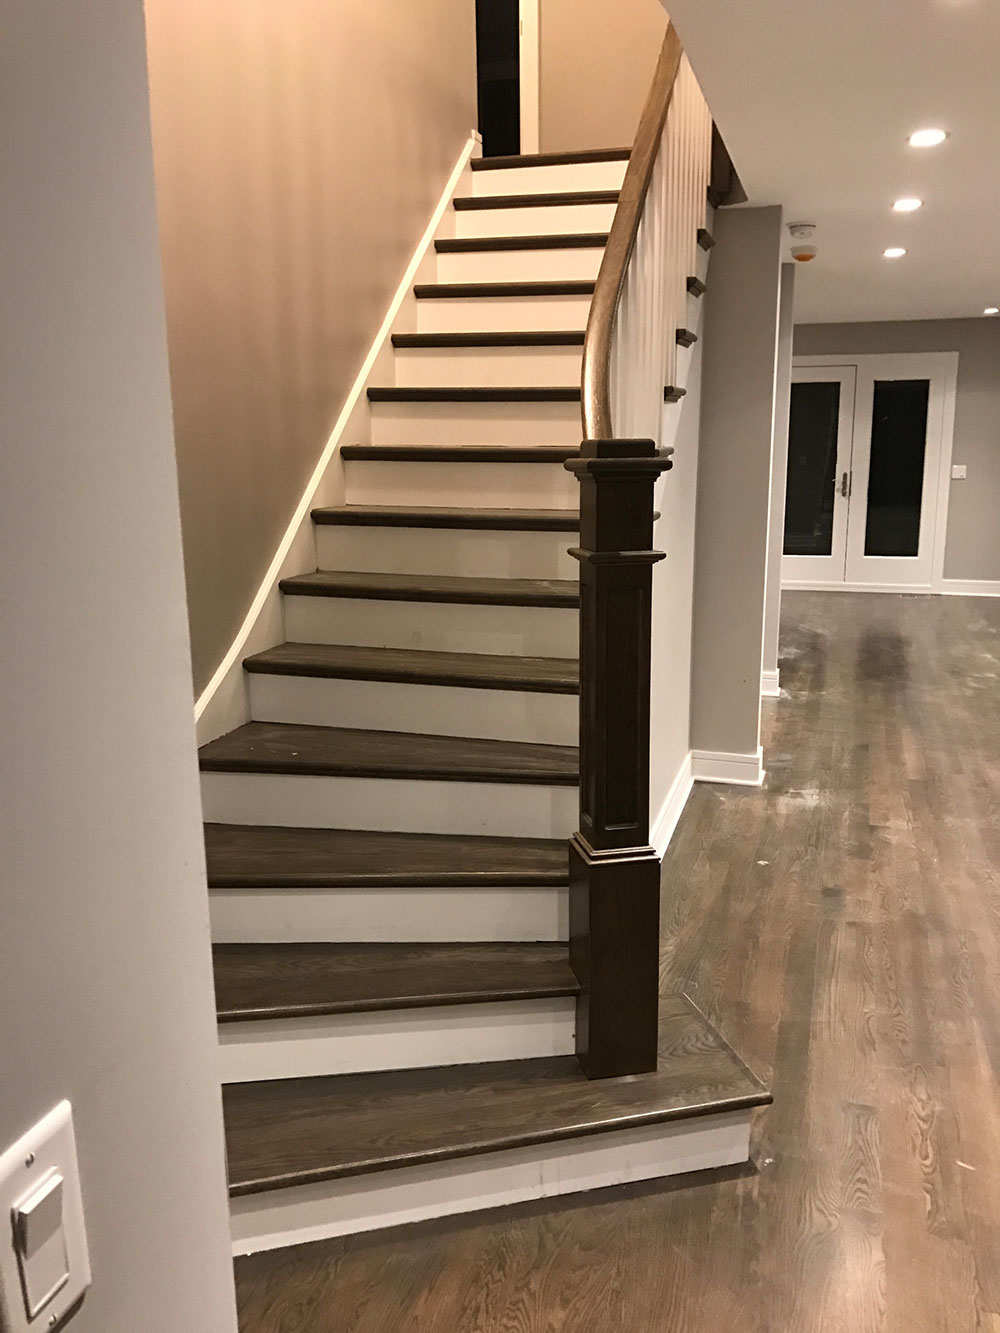 Modern-house-by-Mike_s-Hardwood-Flooring How to install hardwood flooring on stairs with nosing